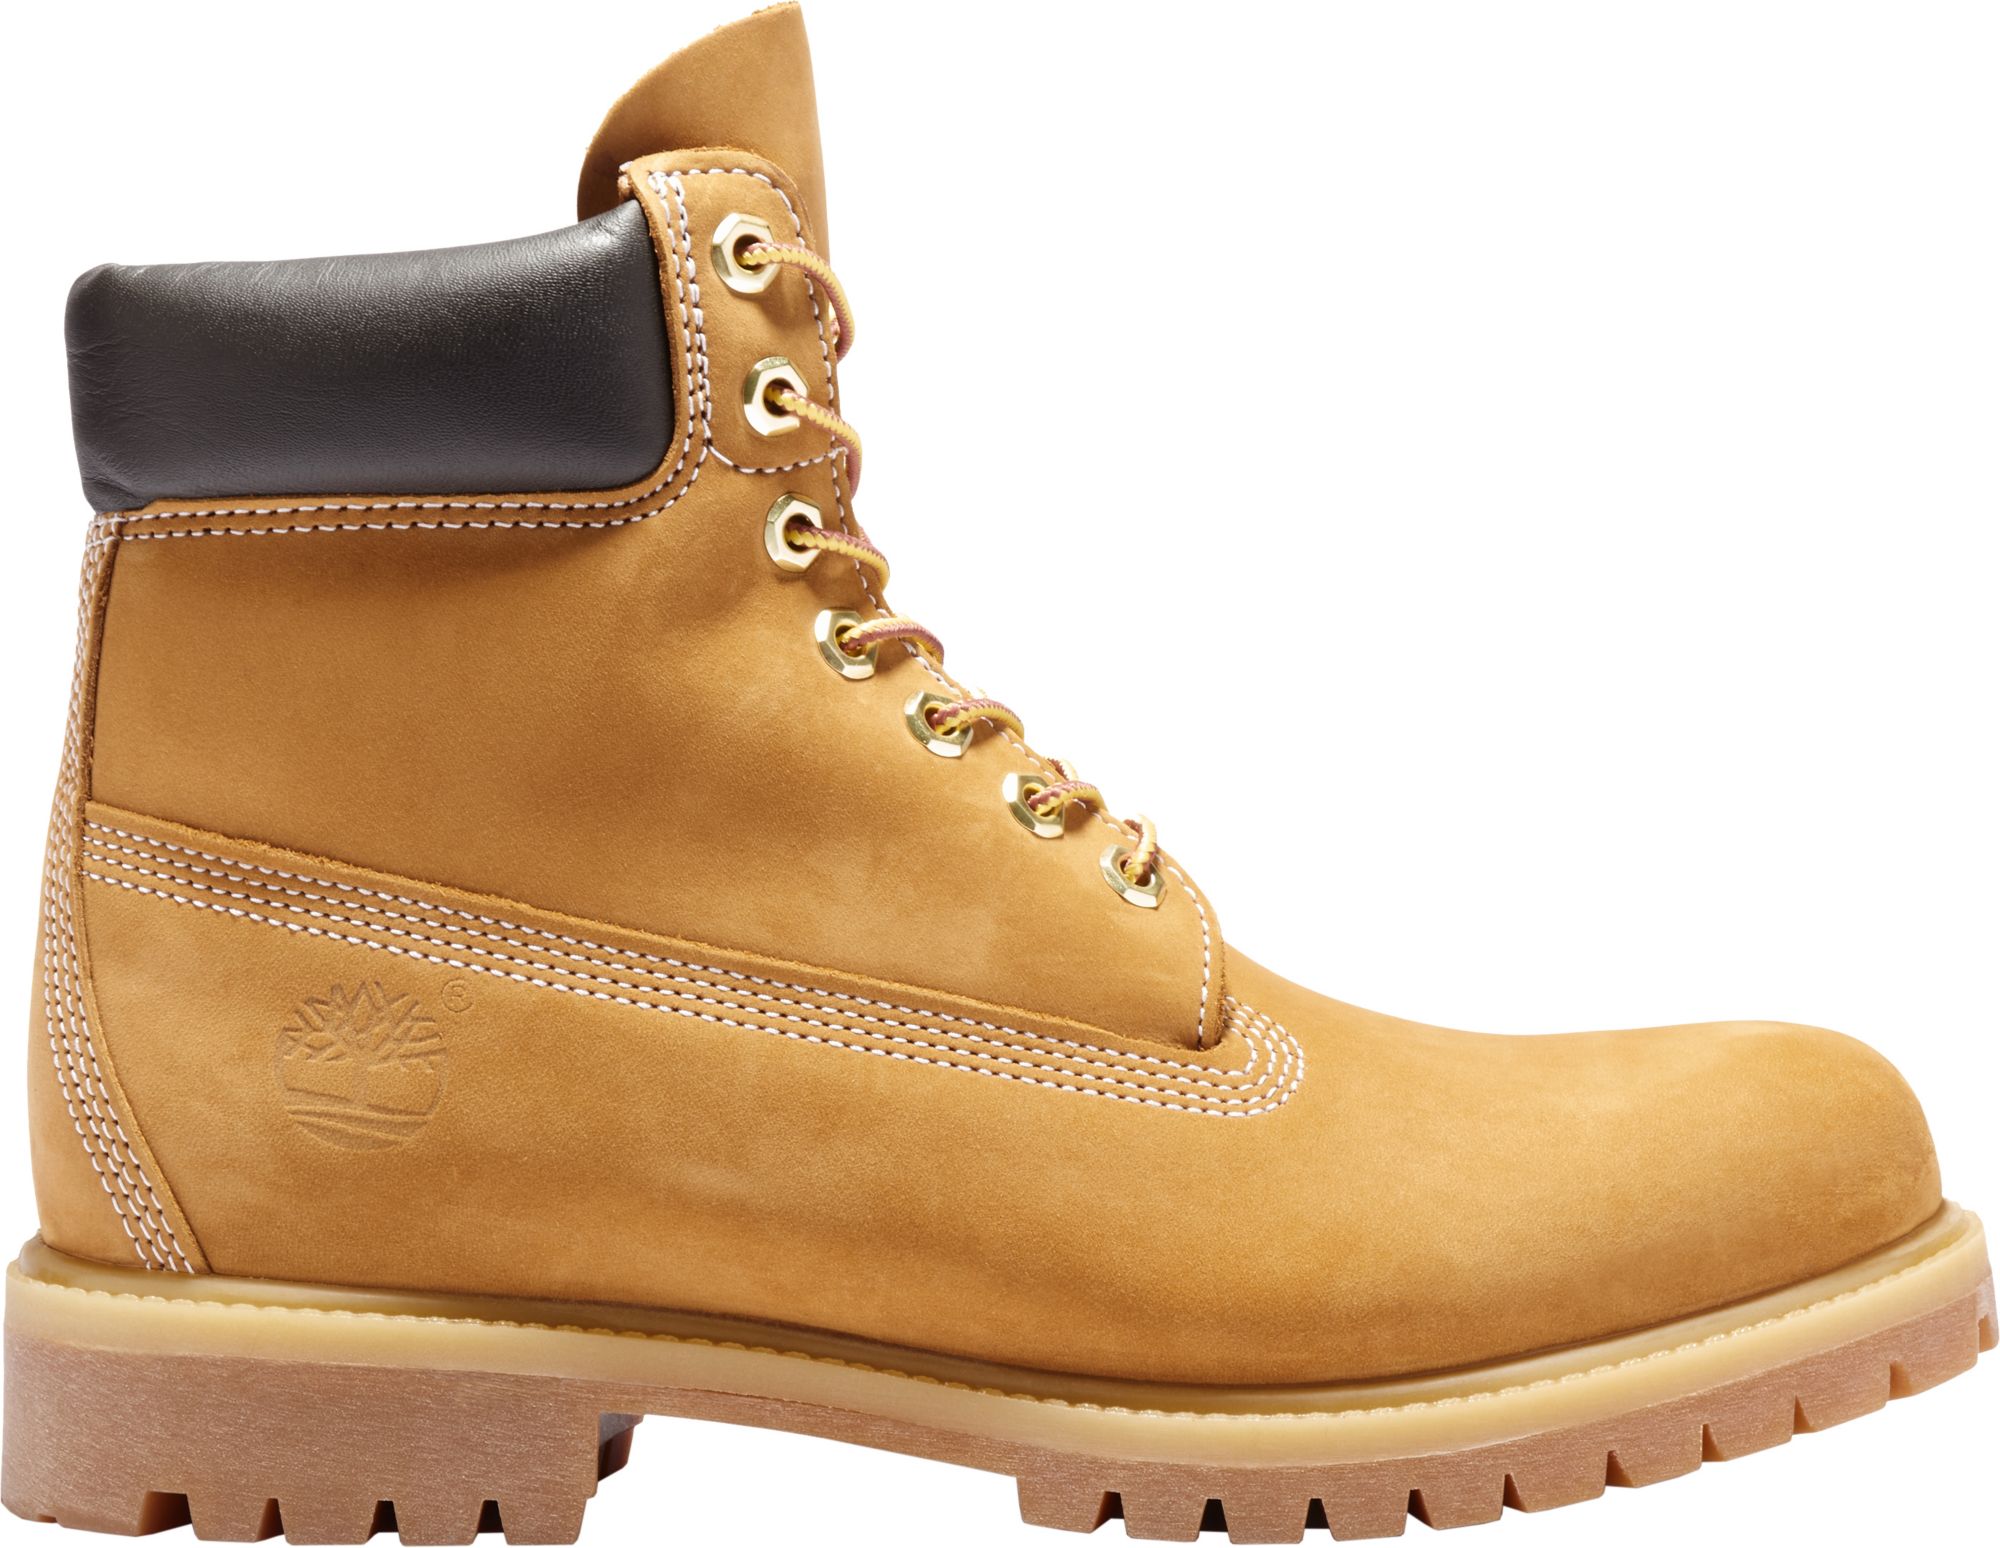 timberland shoes 2018